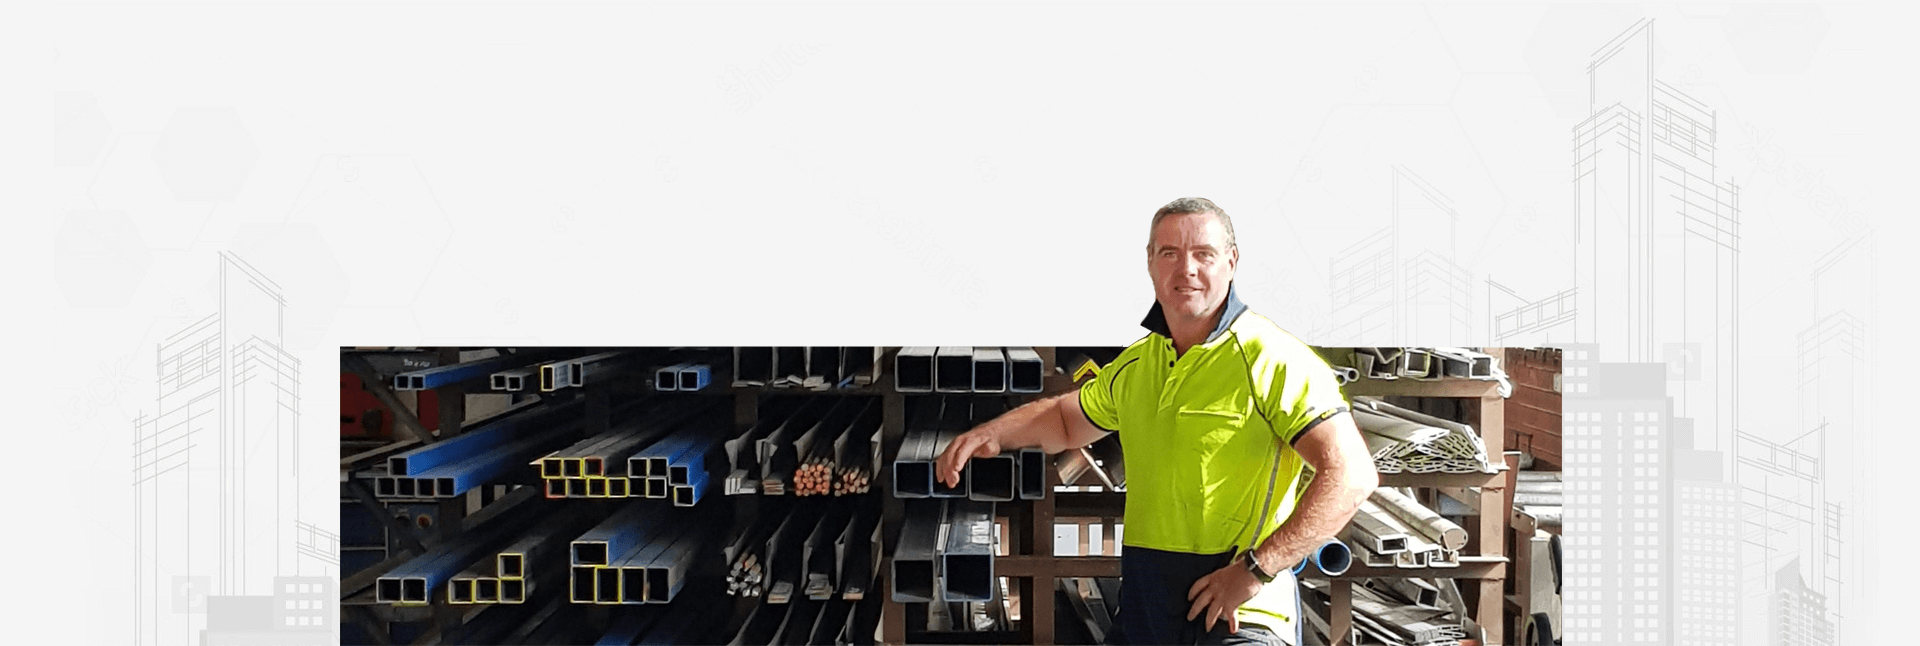 Steel Supply and Fabrication Service in Melbourne & Peninsula area, Victoria